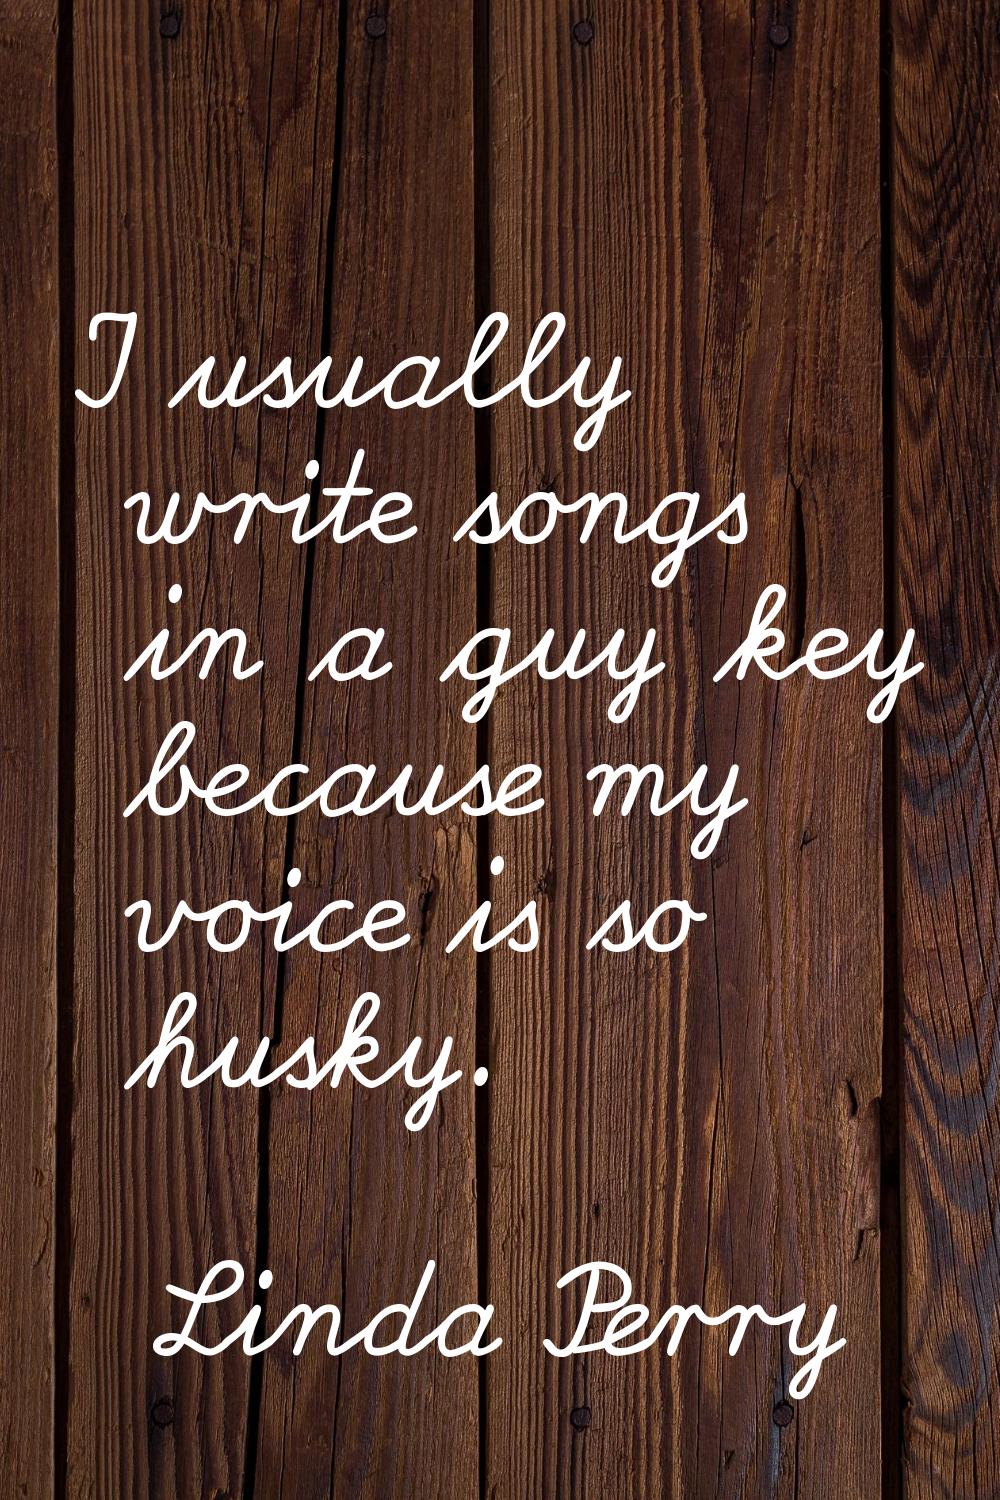 I usually write songs in a guy key because my voice is so husky.